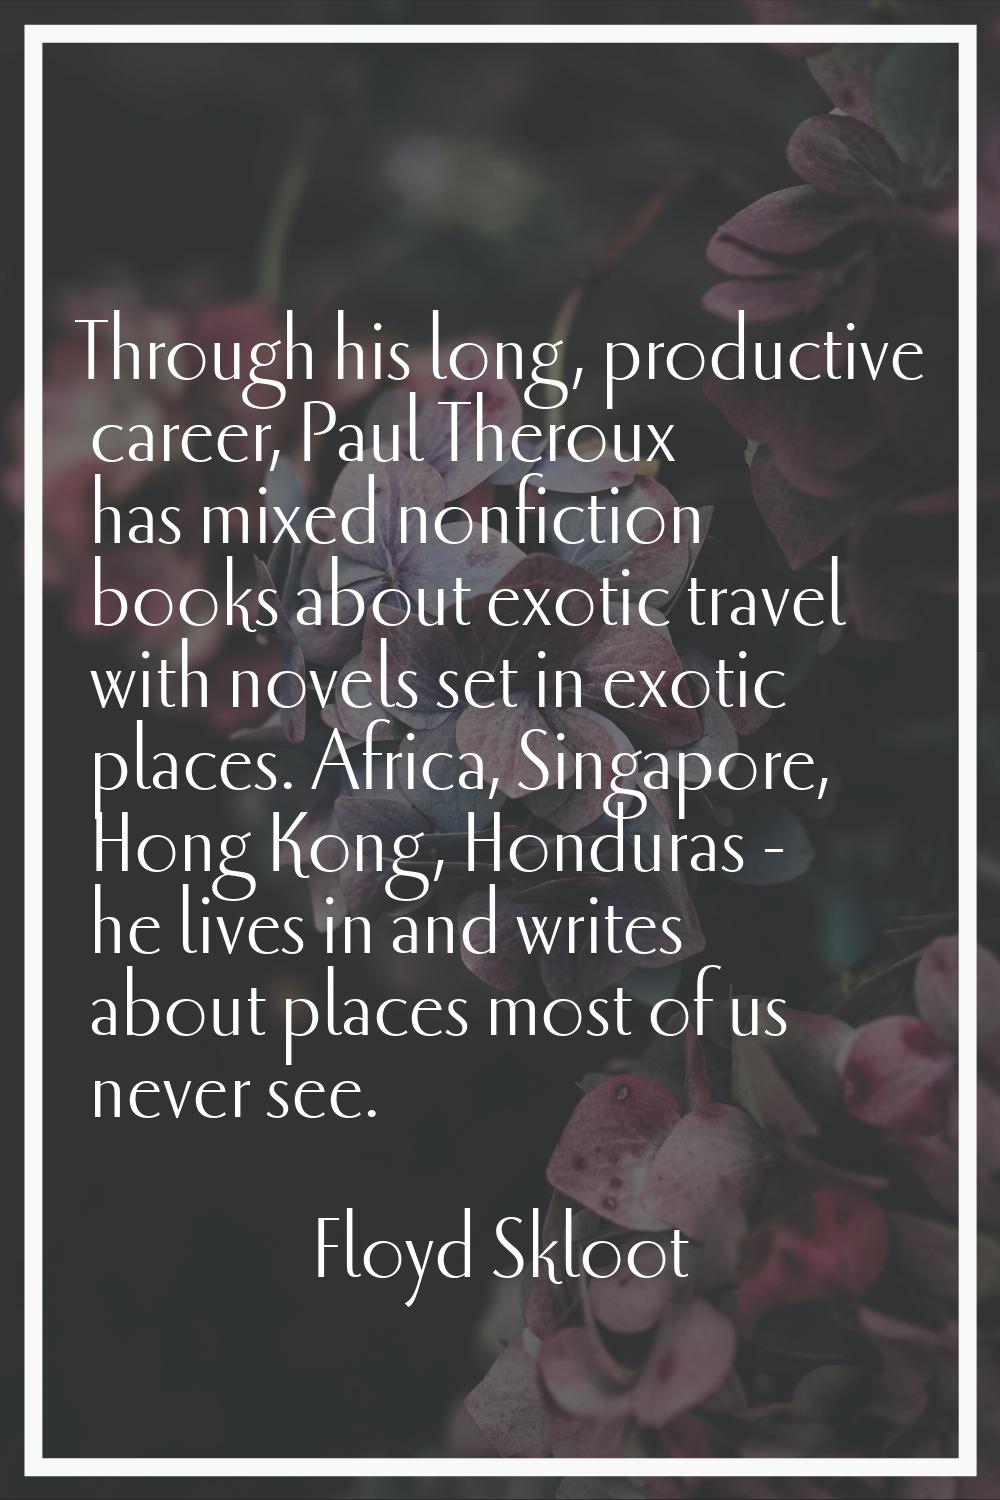 Through his long, productive career, Paul Theroux has mixed nonfiction books about exotic travel wi